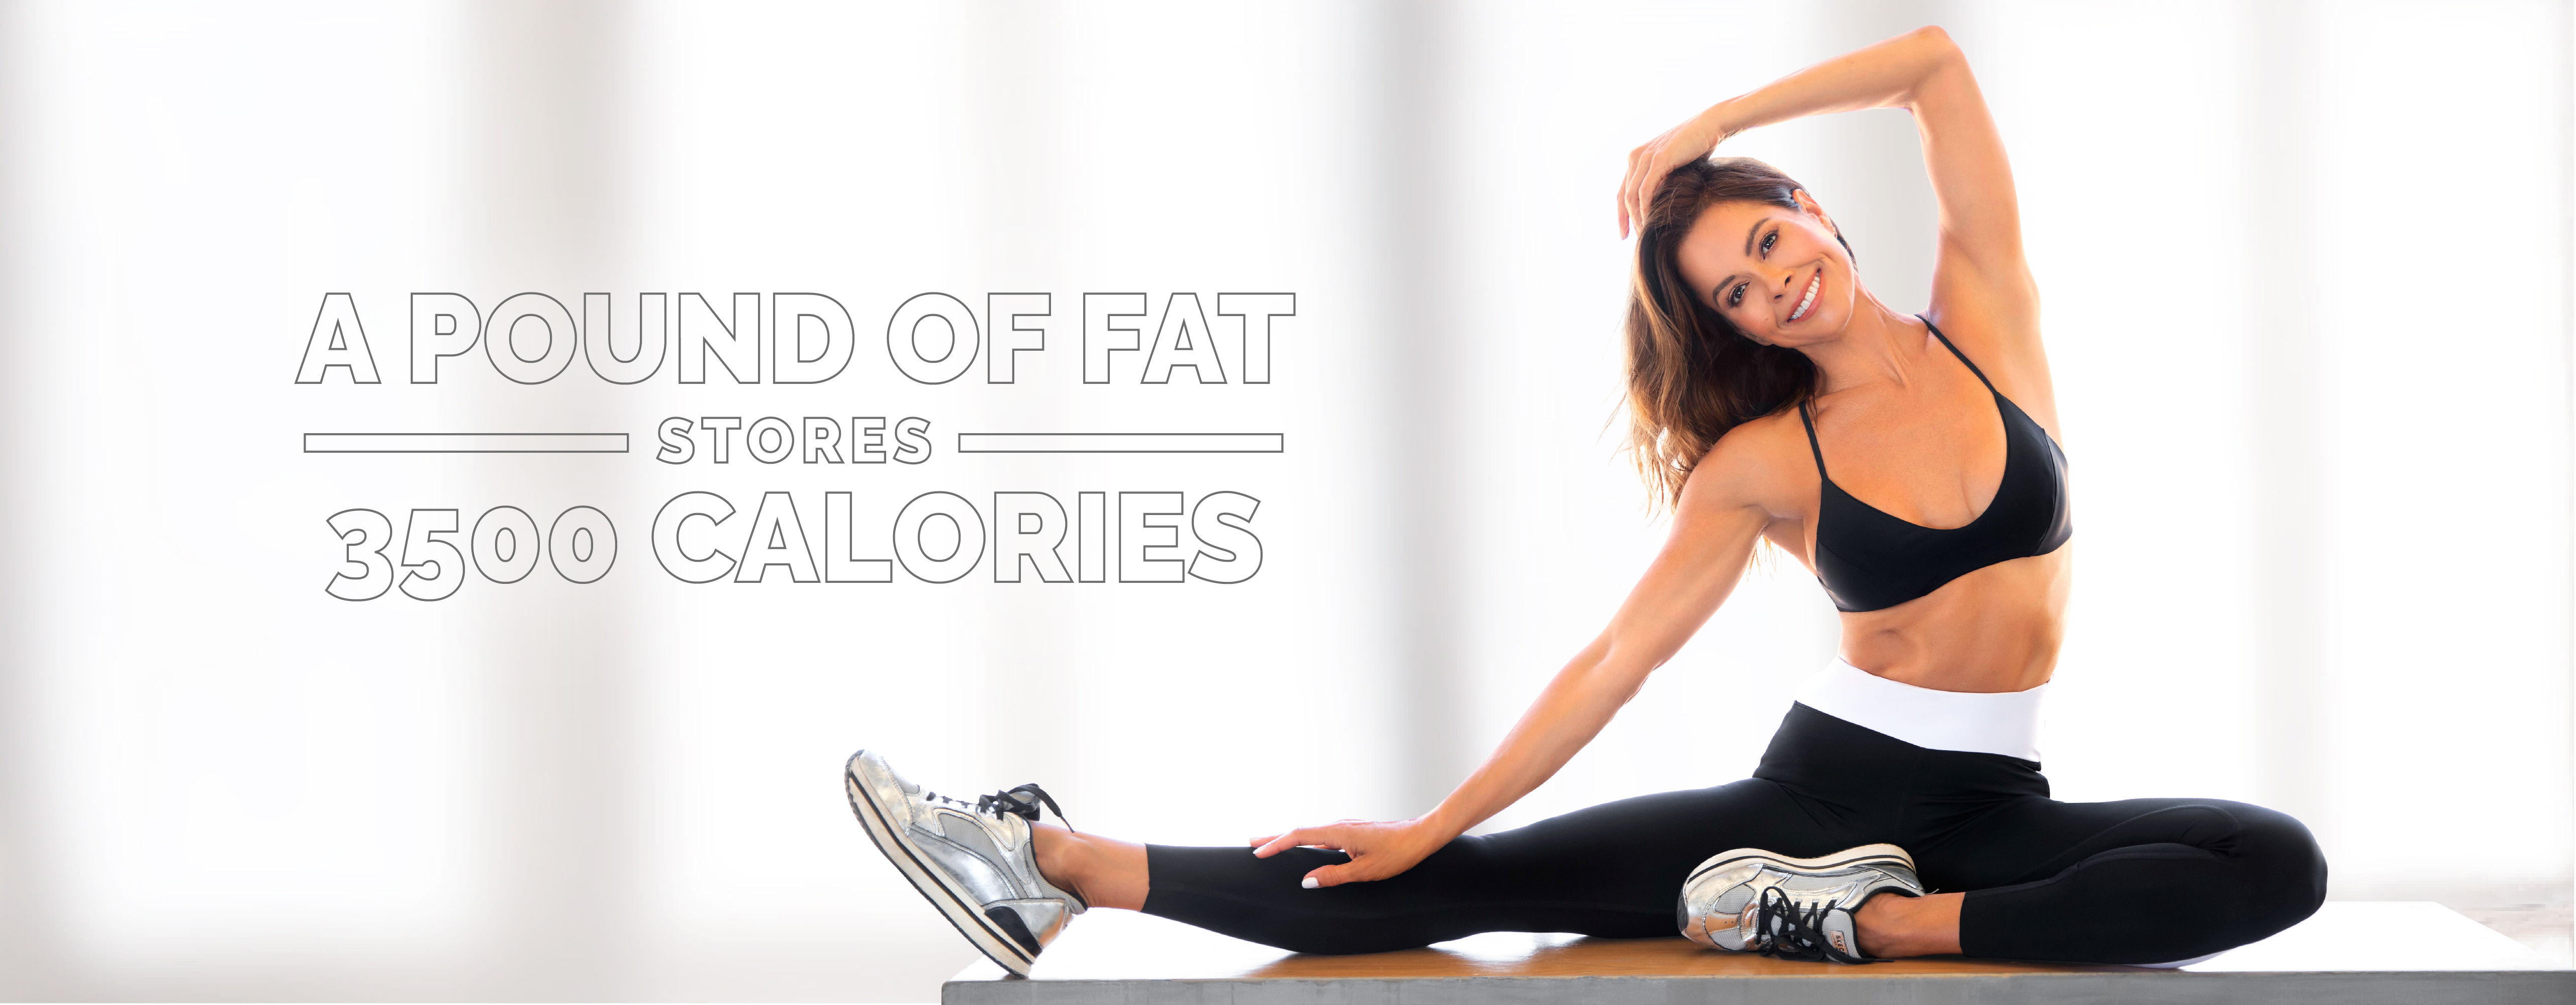 What Workout Burns the Most Fat image 300ppi 1